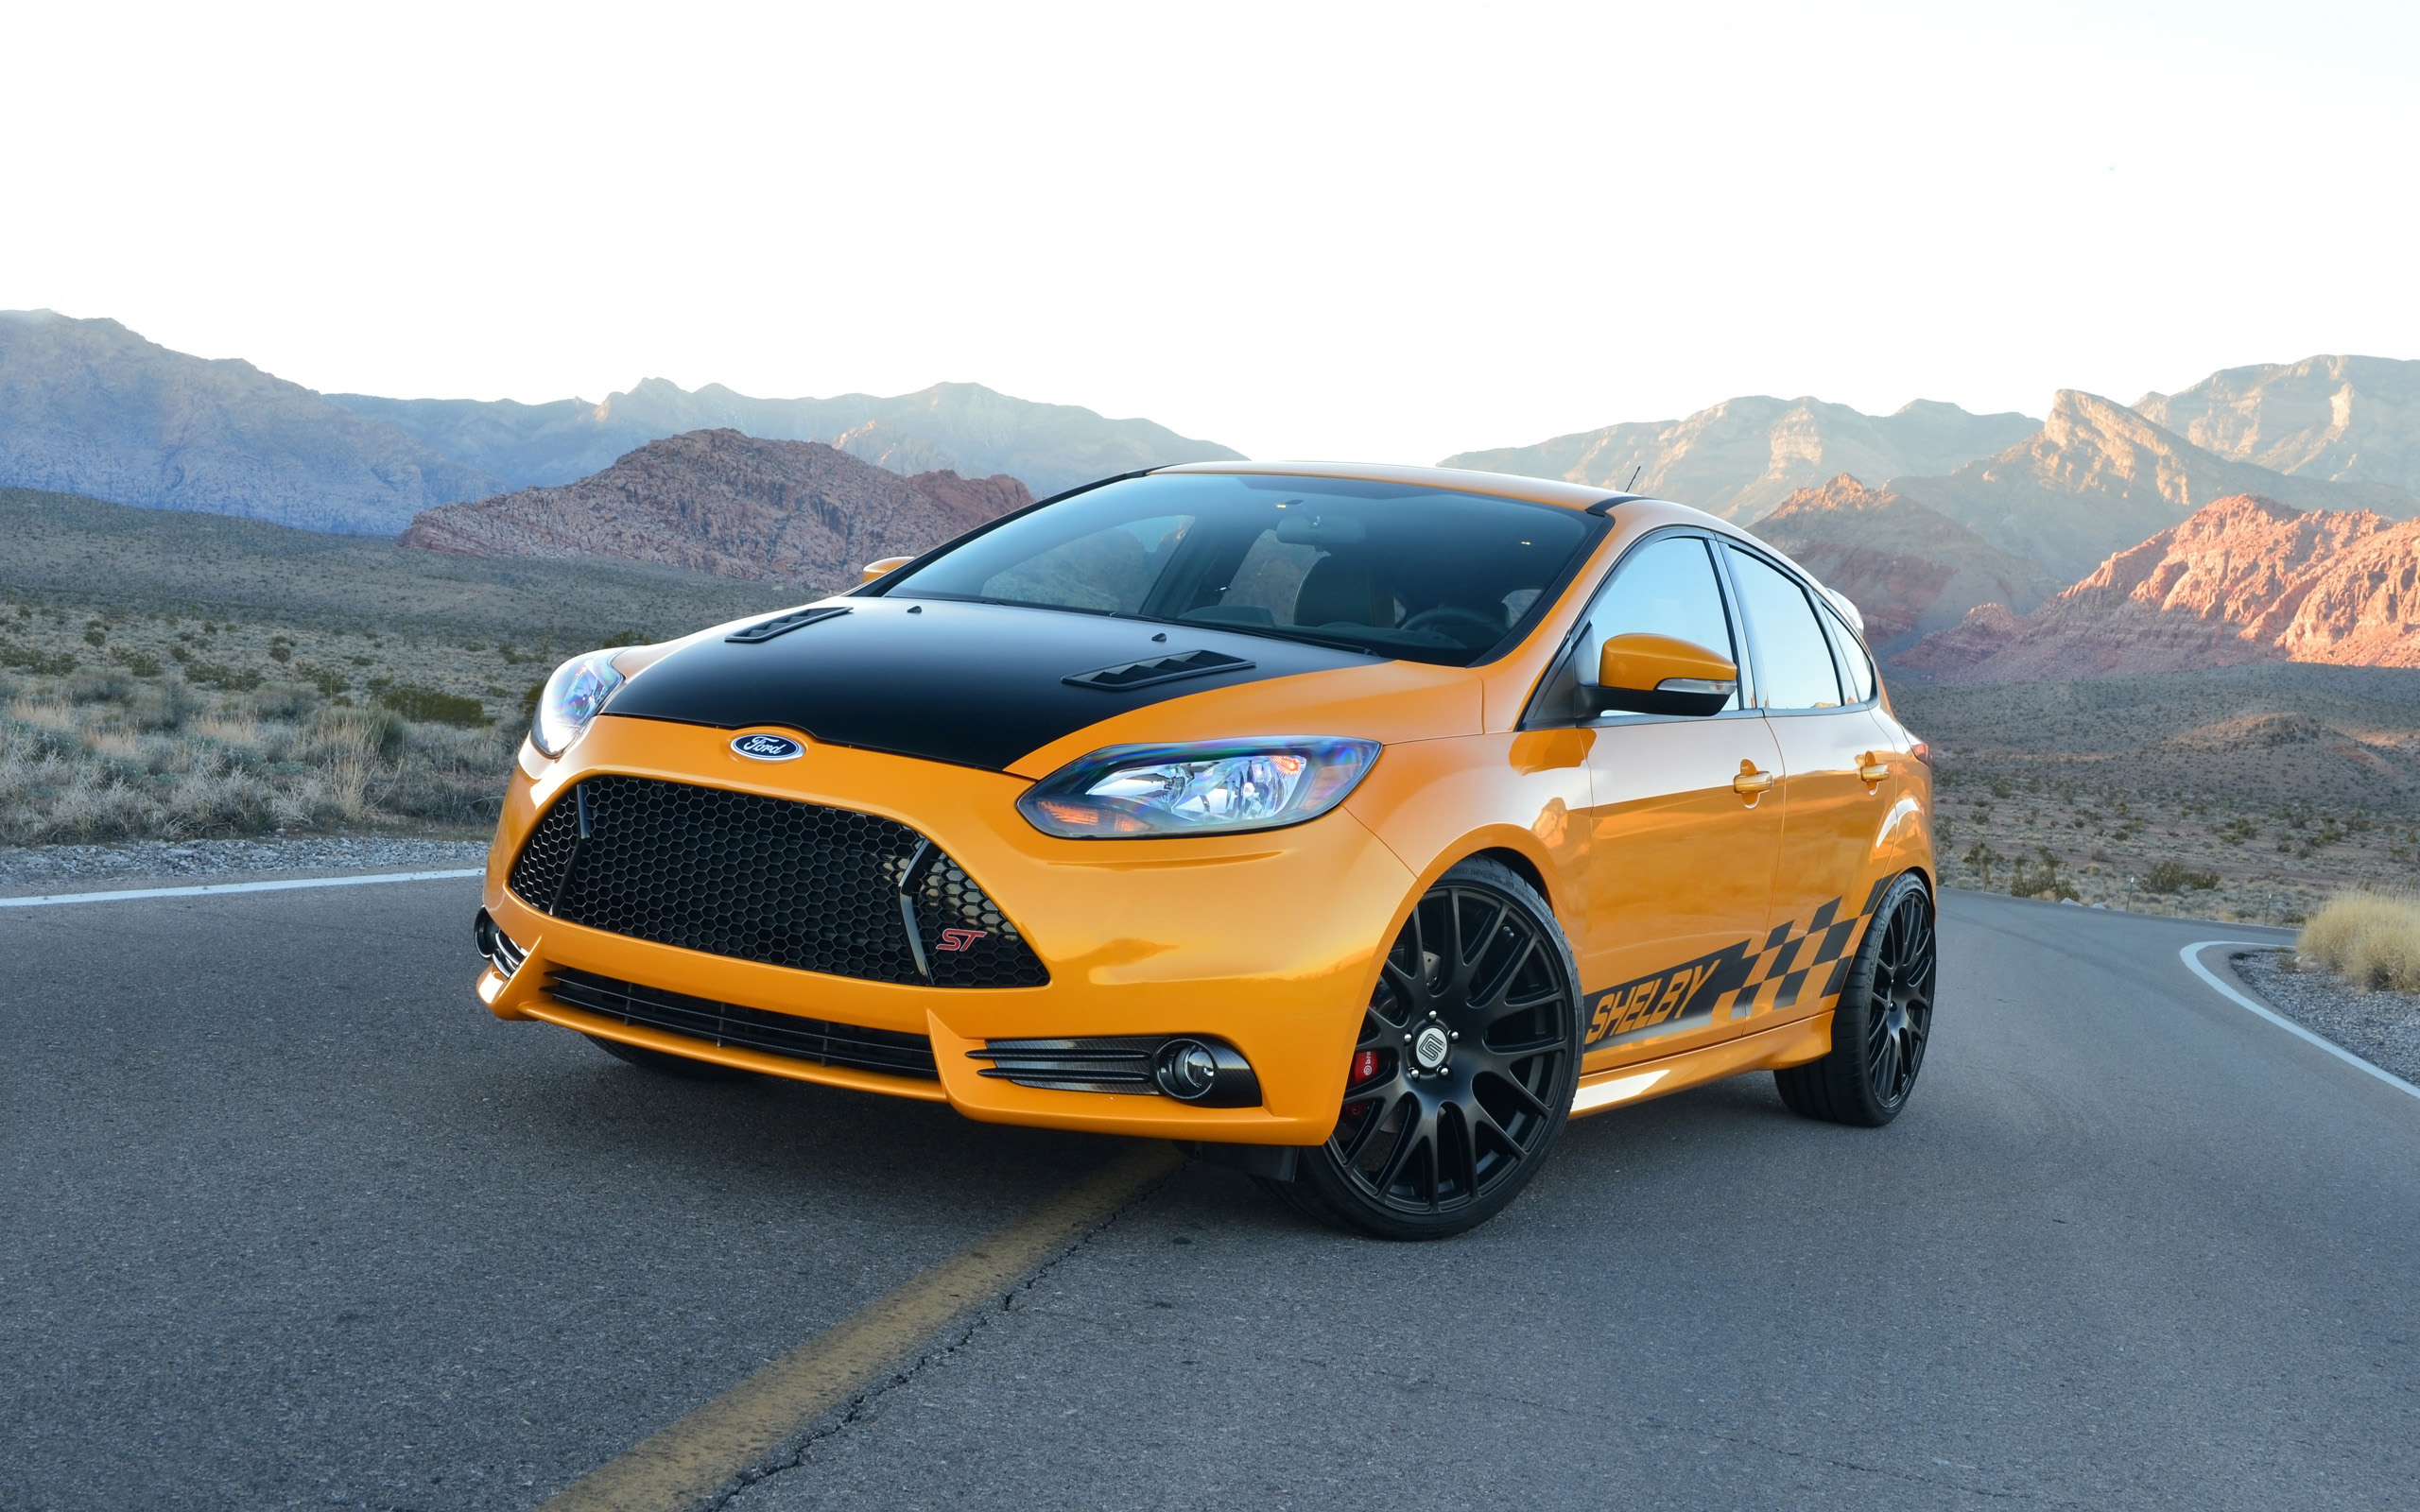 All-New 2019 Ford Focus ST Breaks Cover With 280 PS 2.3L 